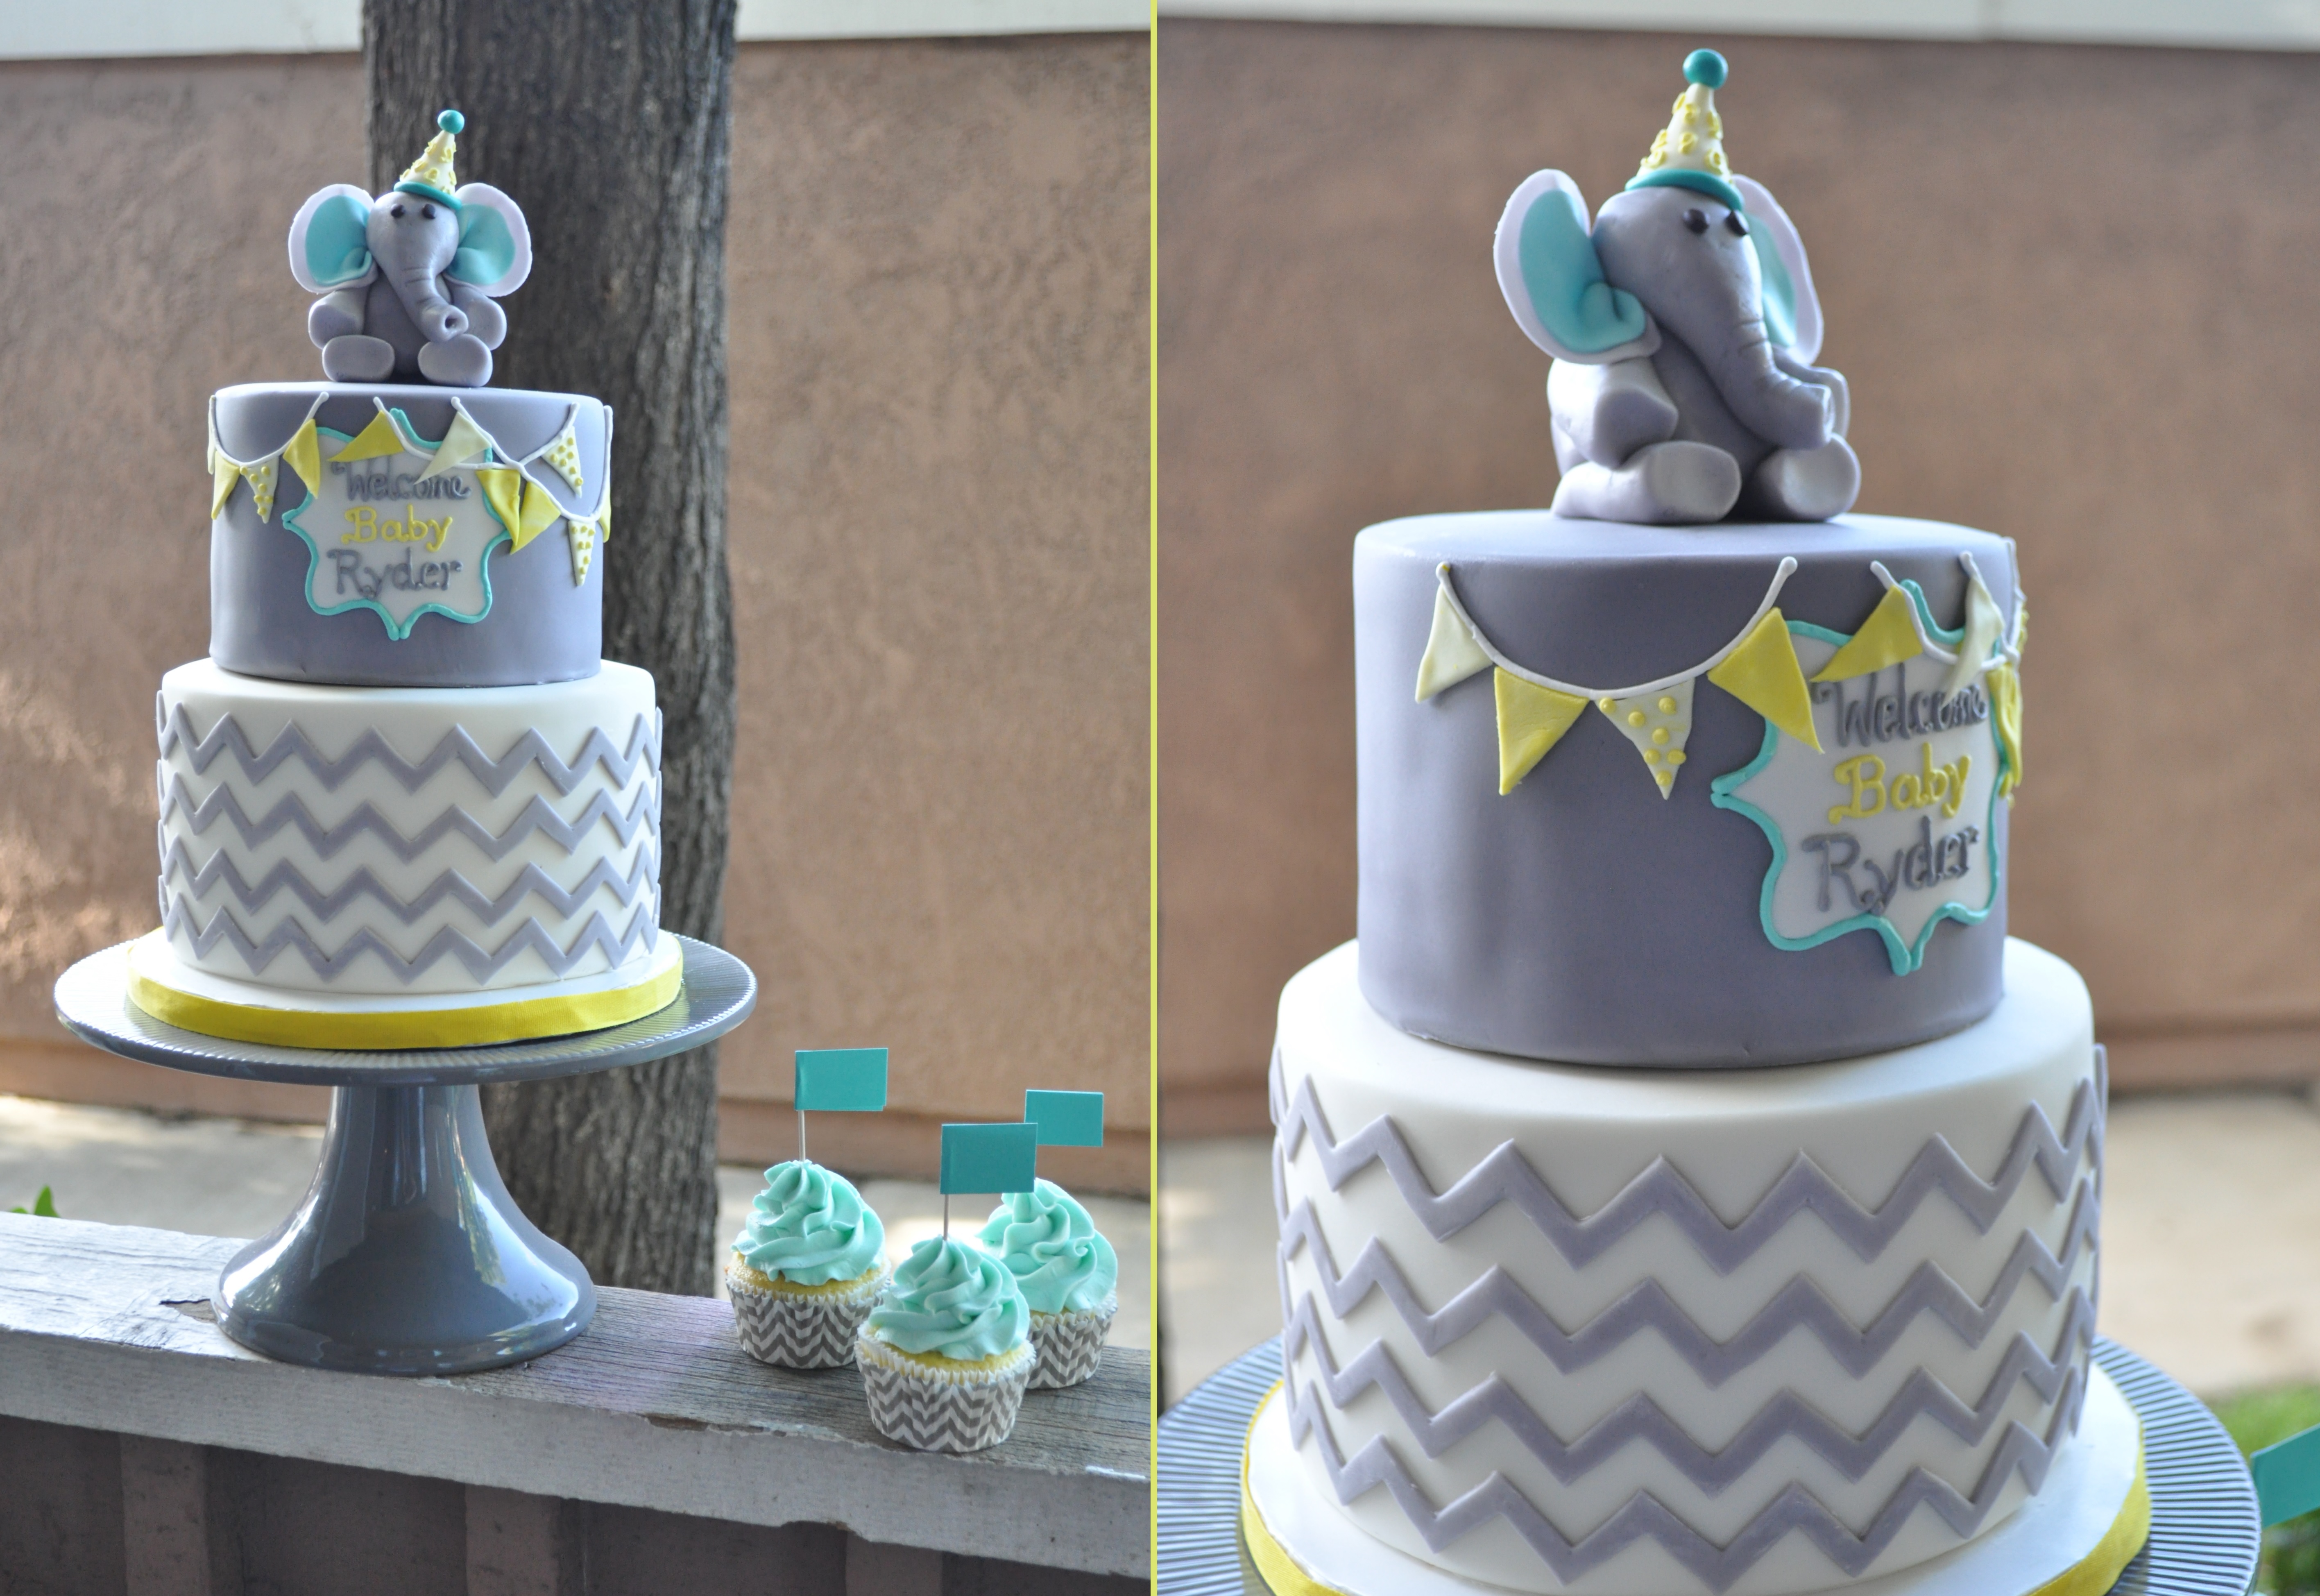 Chevron and Polka Dot Baby Shower | thebakeboutique